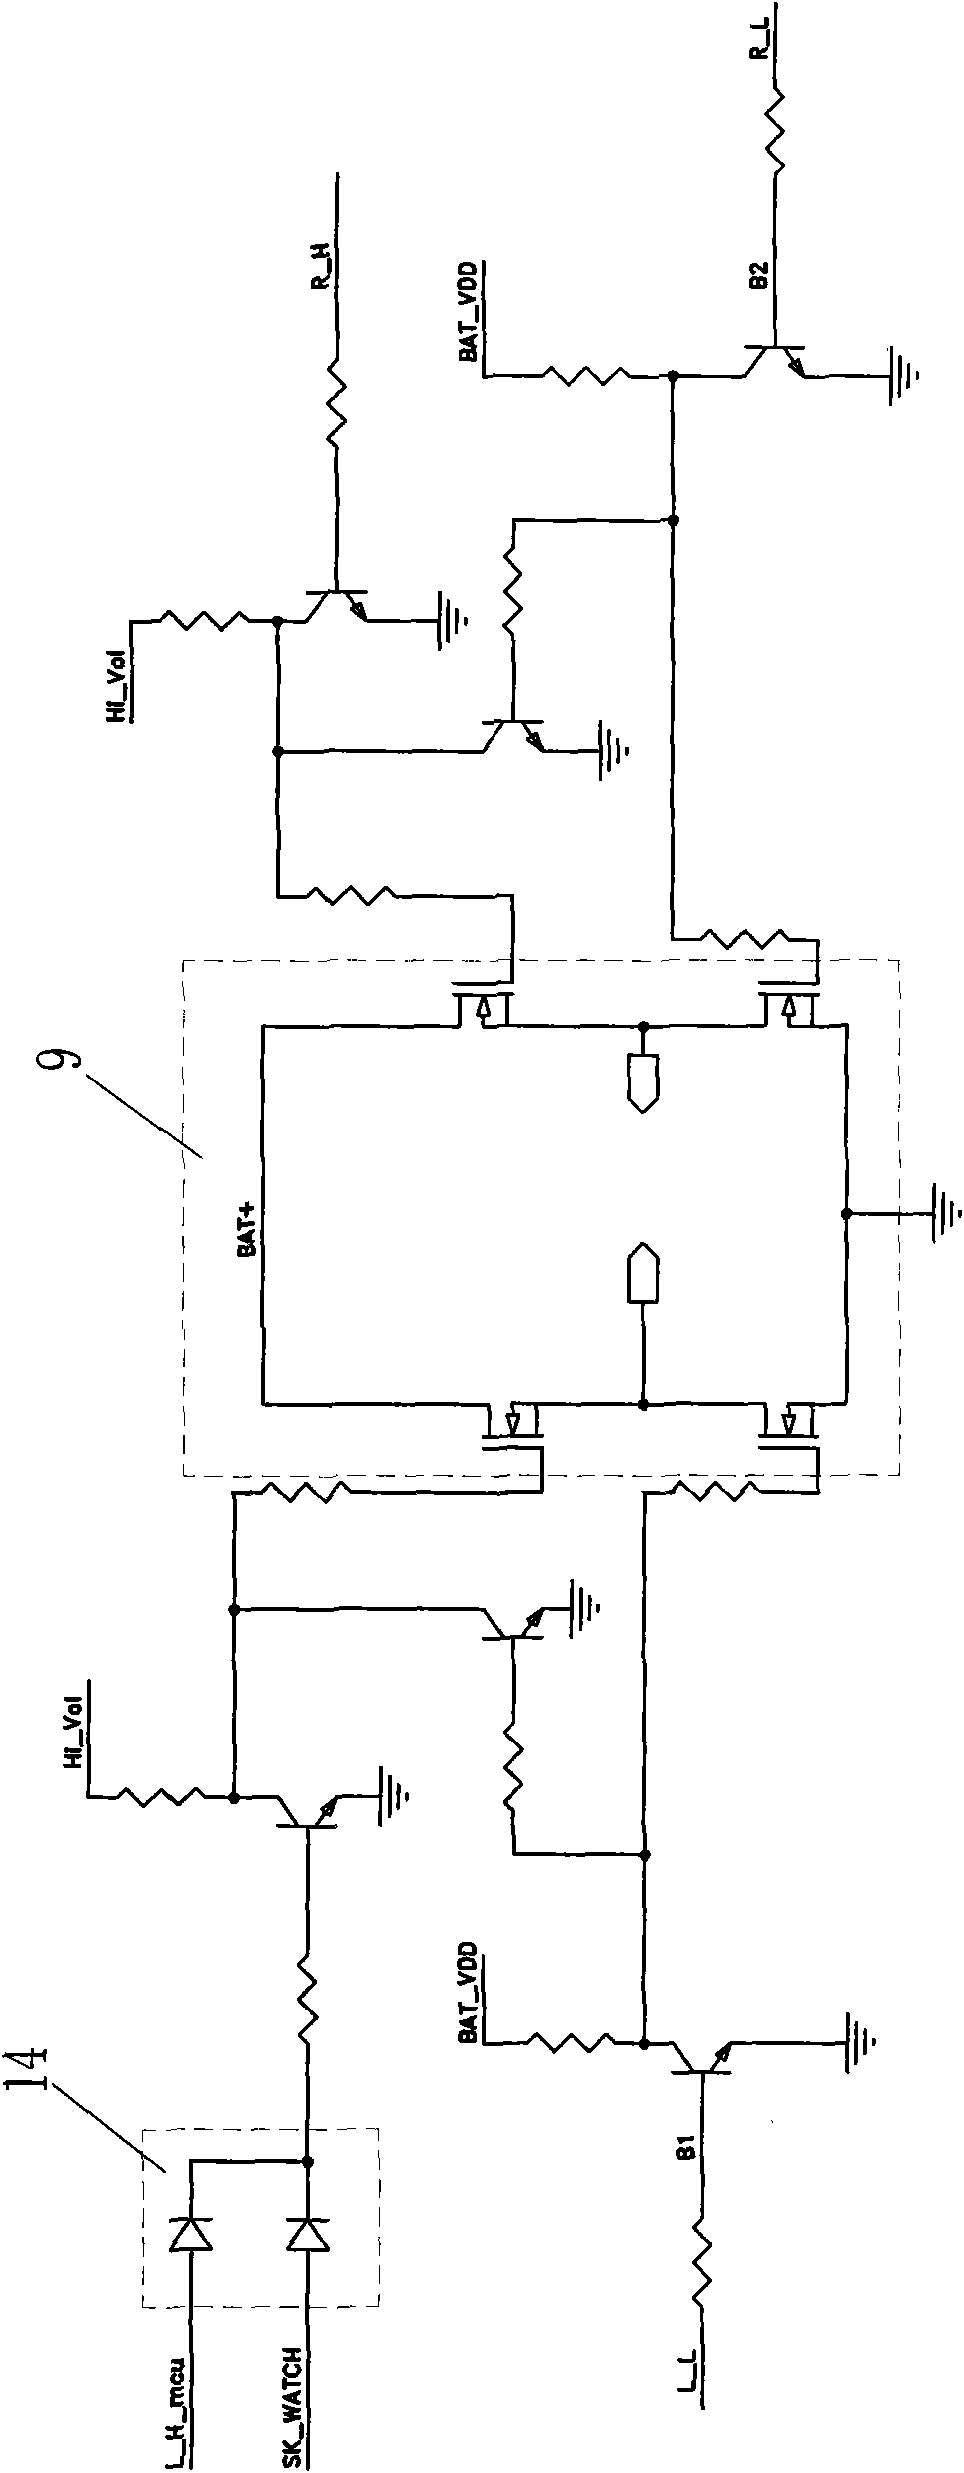 Control method of electric clippers